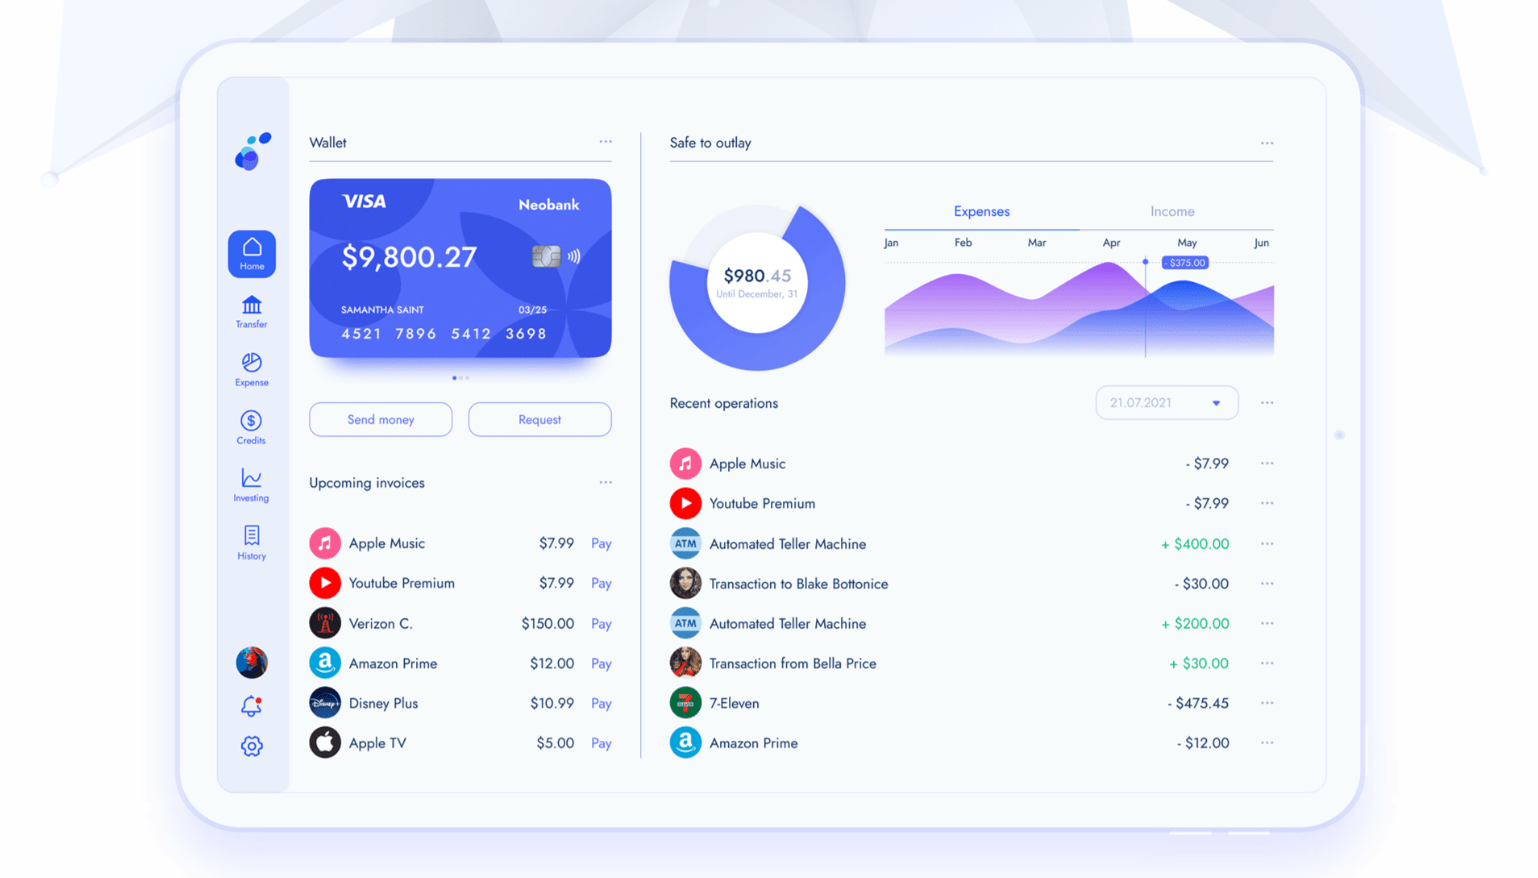 bank dashboard ui showing wallet and recent operations